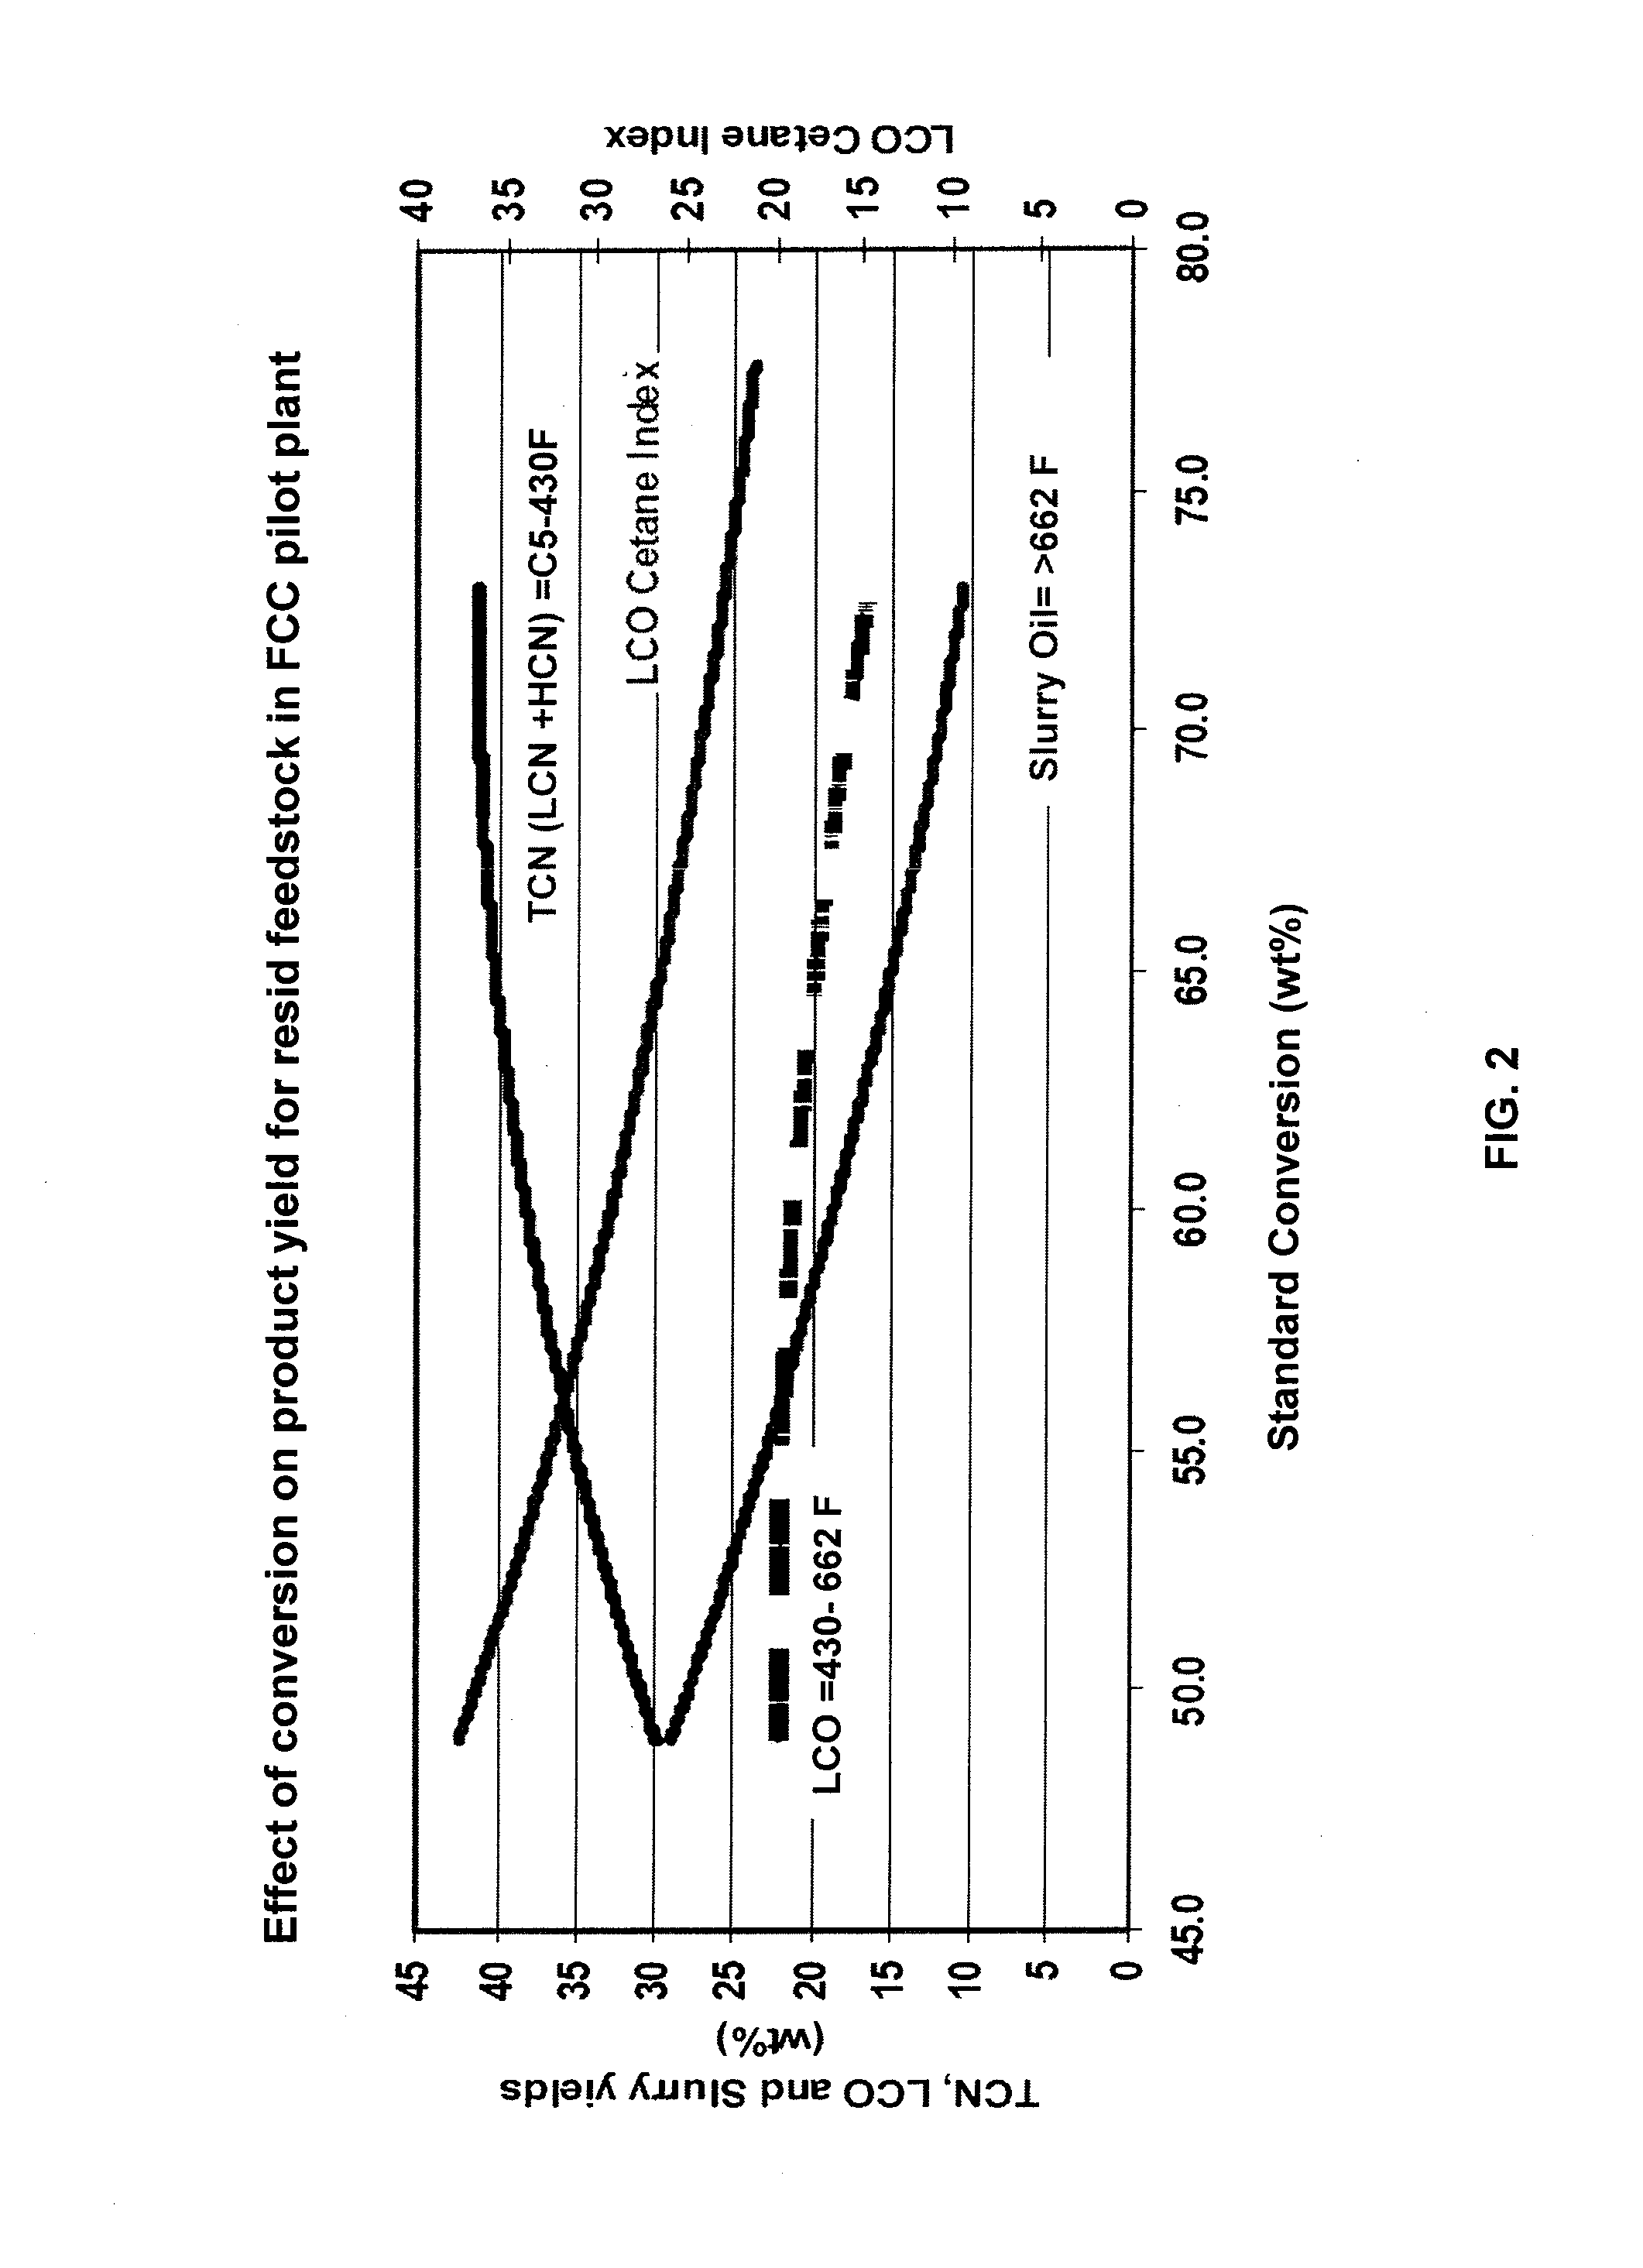 Process for maximum distillate production from fluid catalytic cracking units (FCCU)